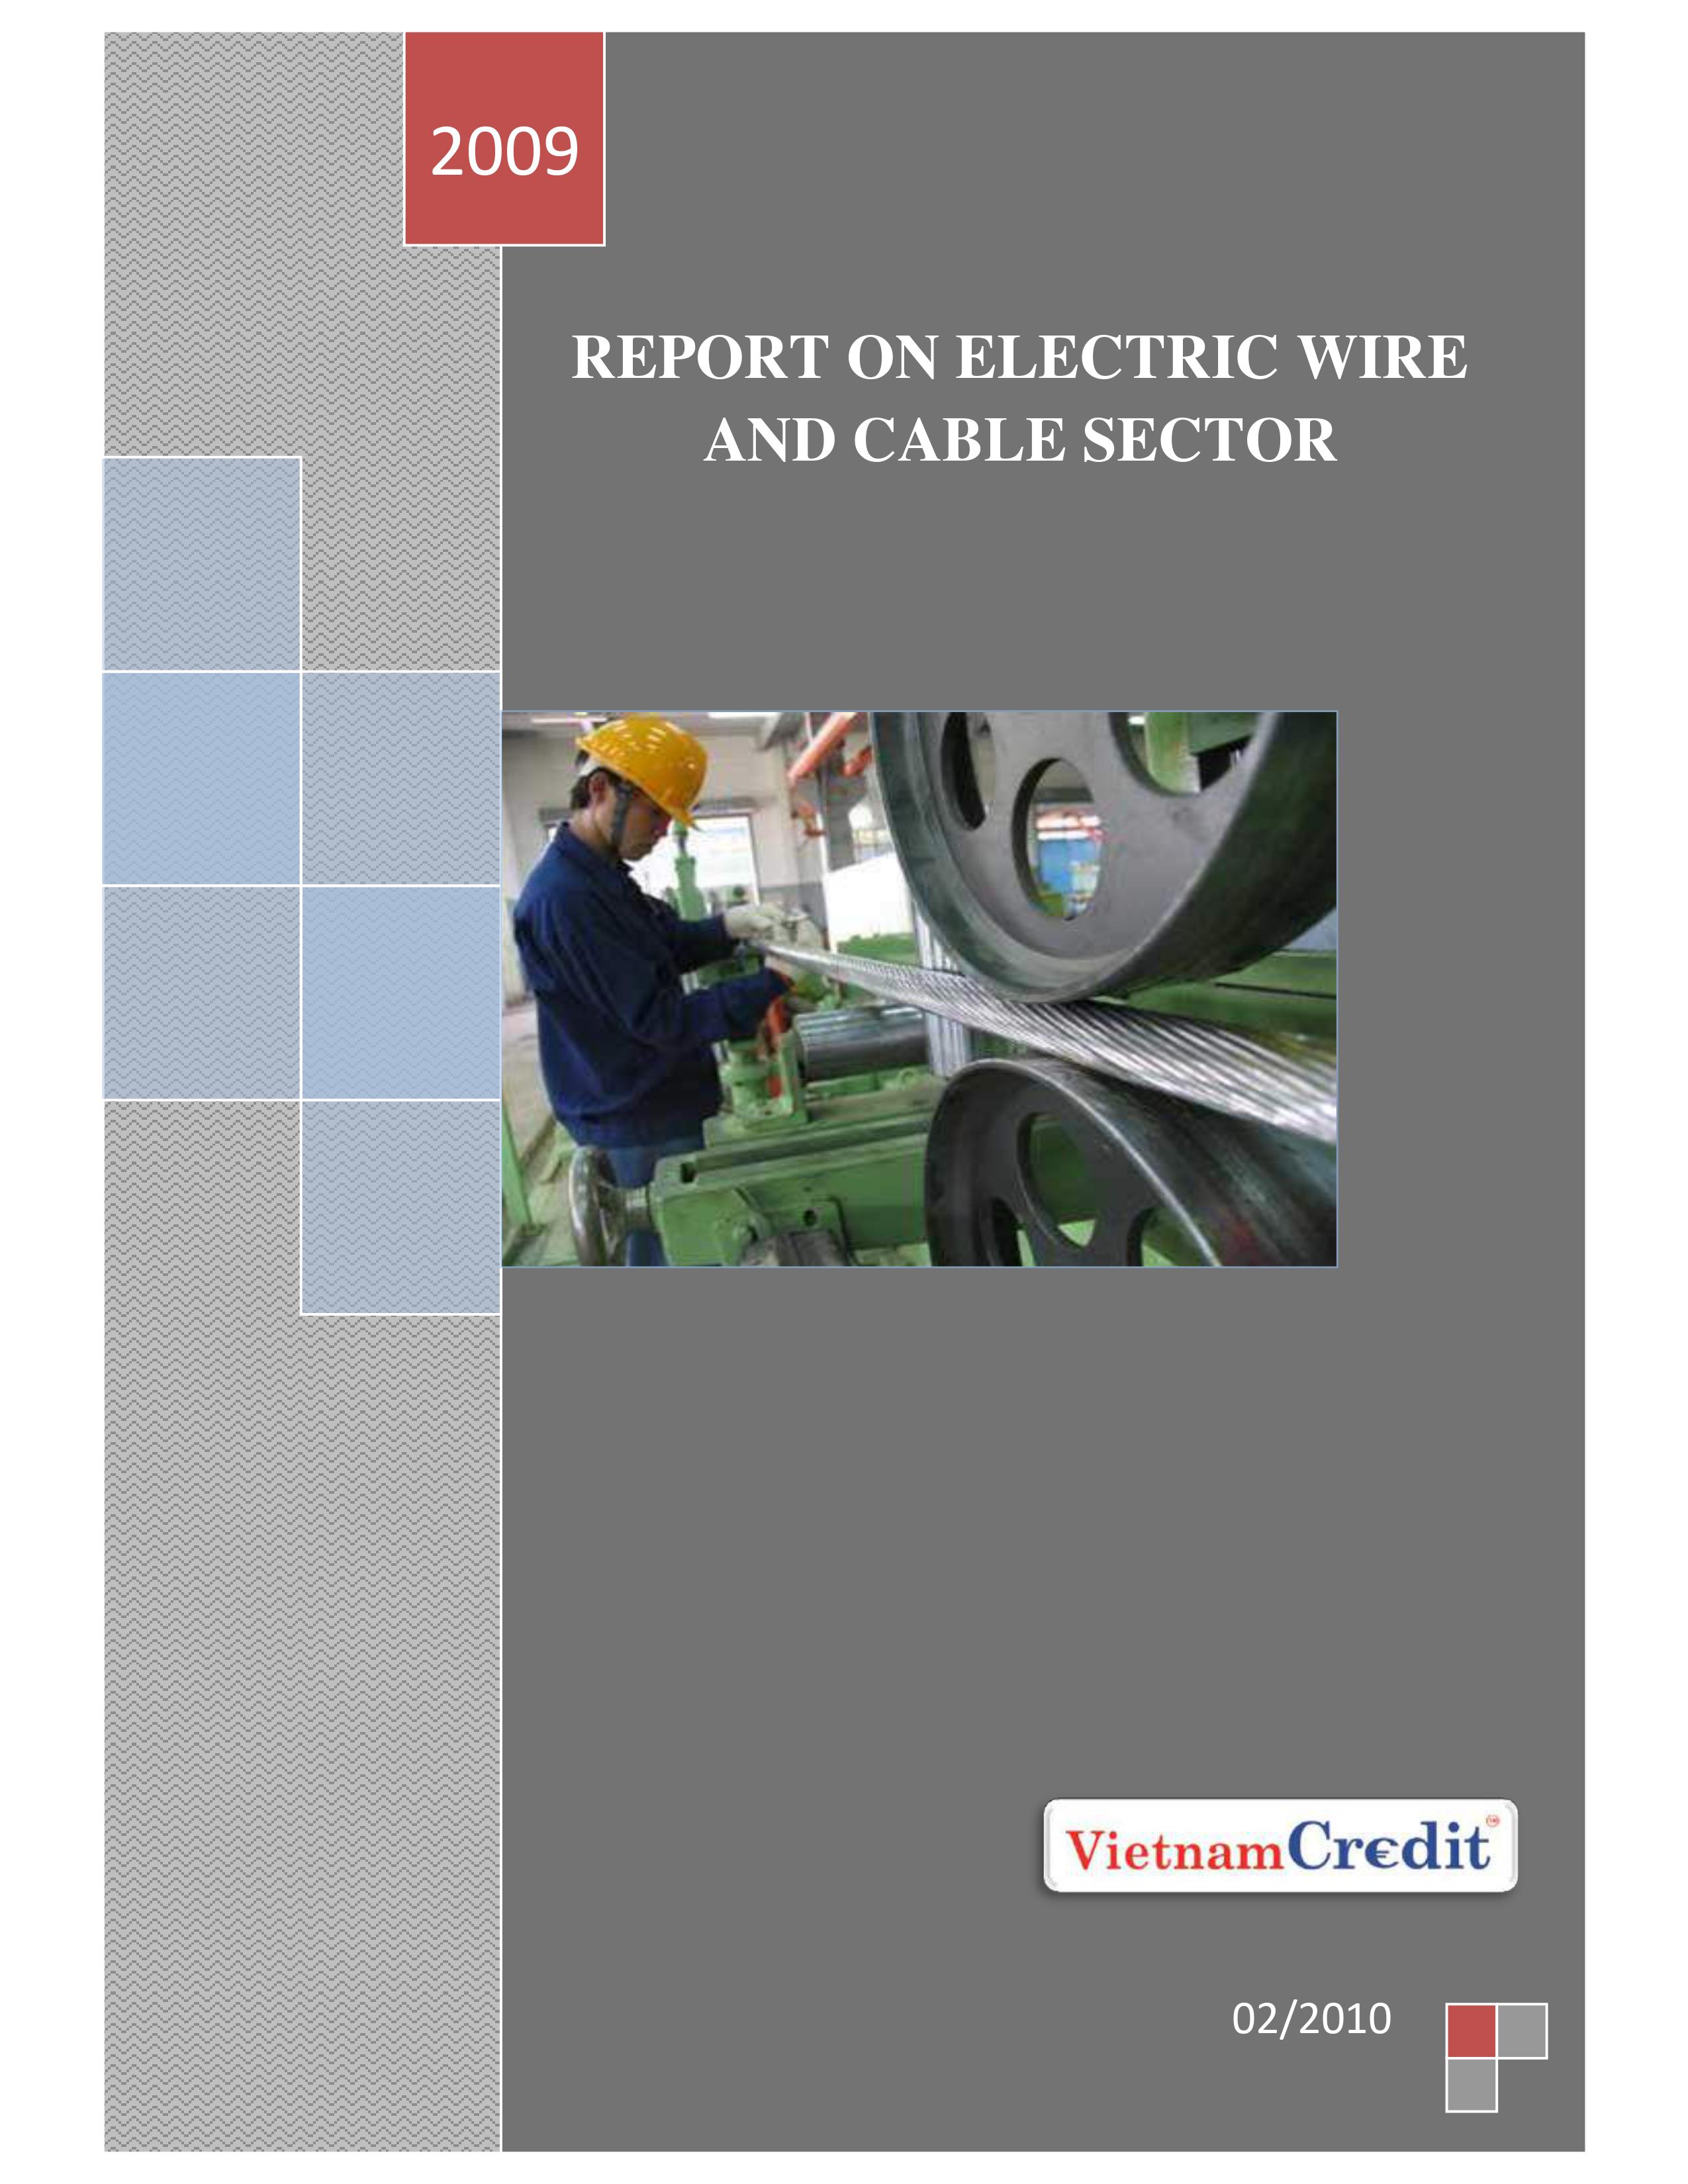 Vietnam Electric Wire and Cable Sector Industry Report 2010